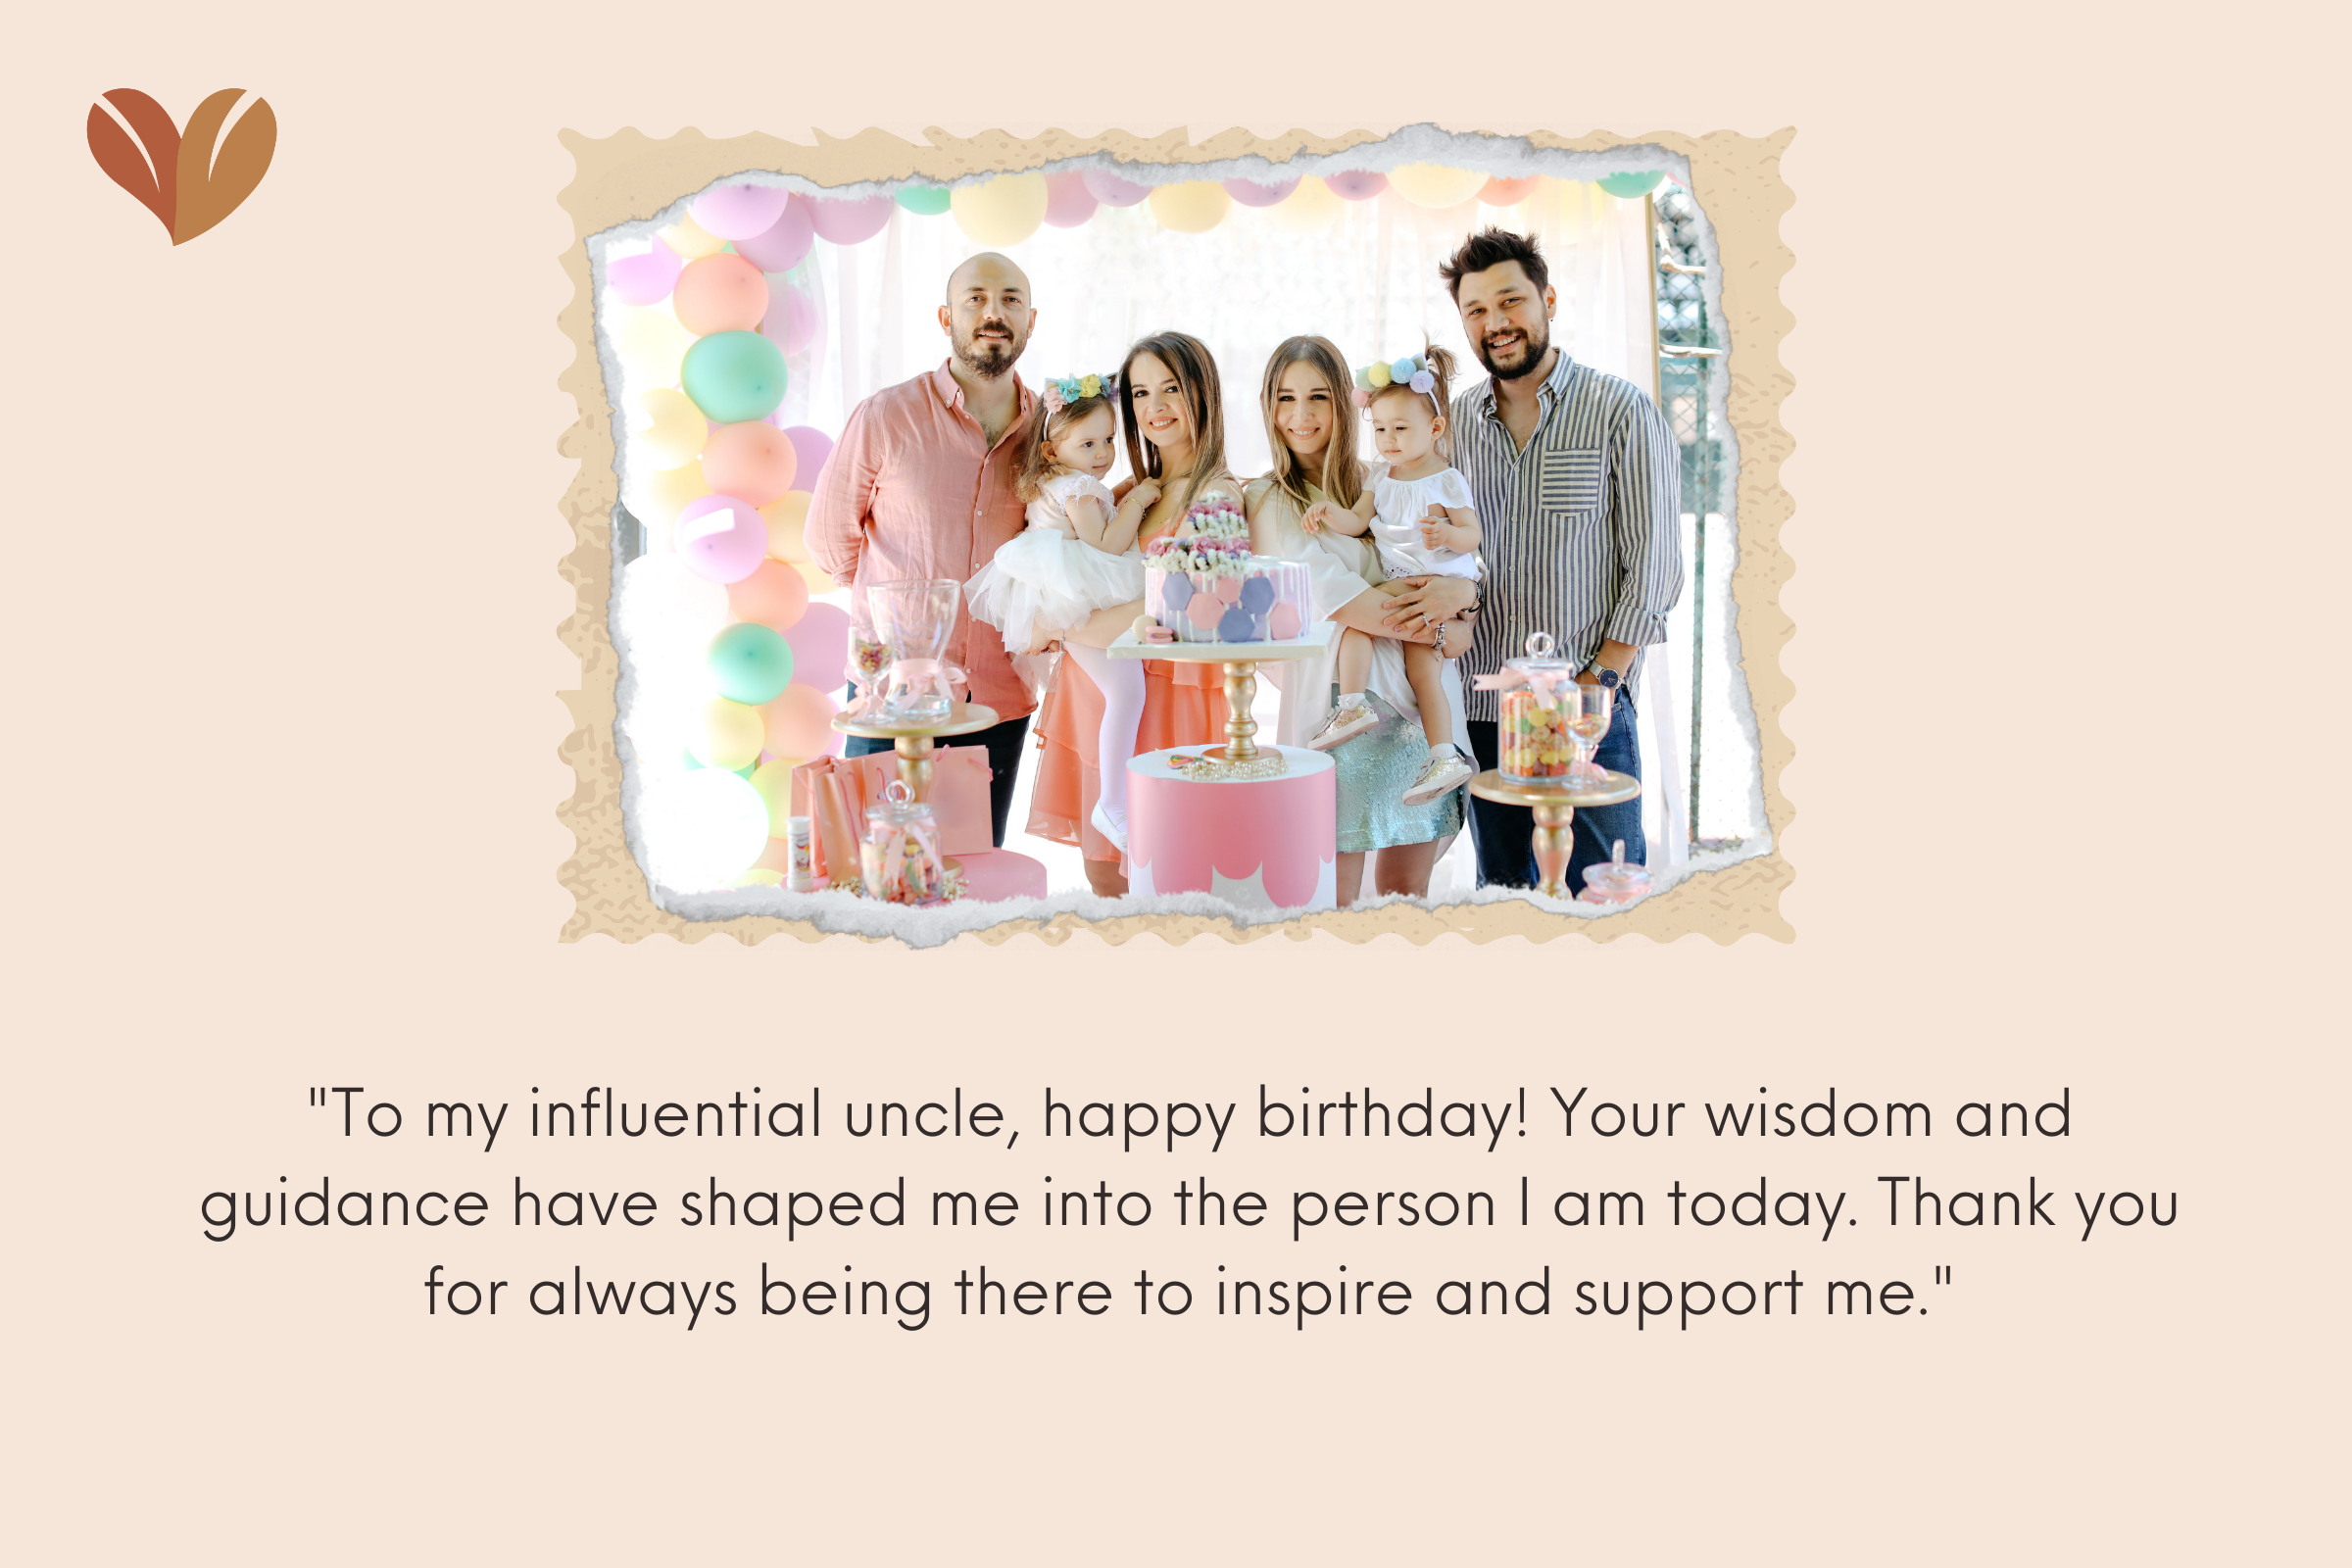 Heartflet wishes to Happy birthday to uncle